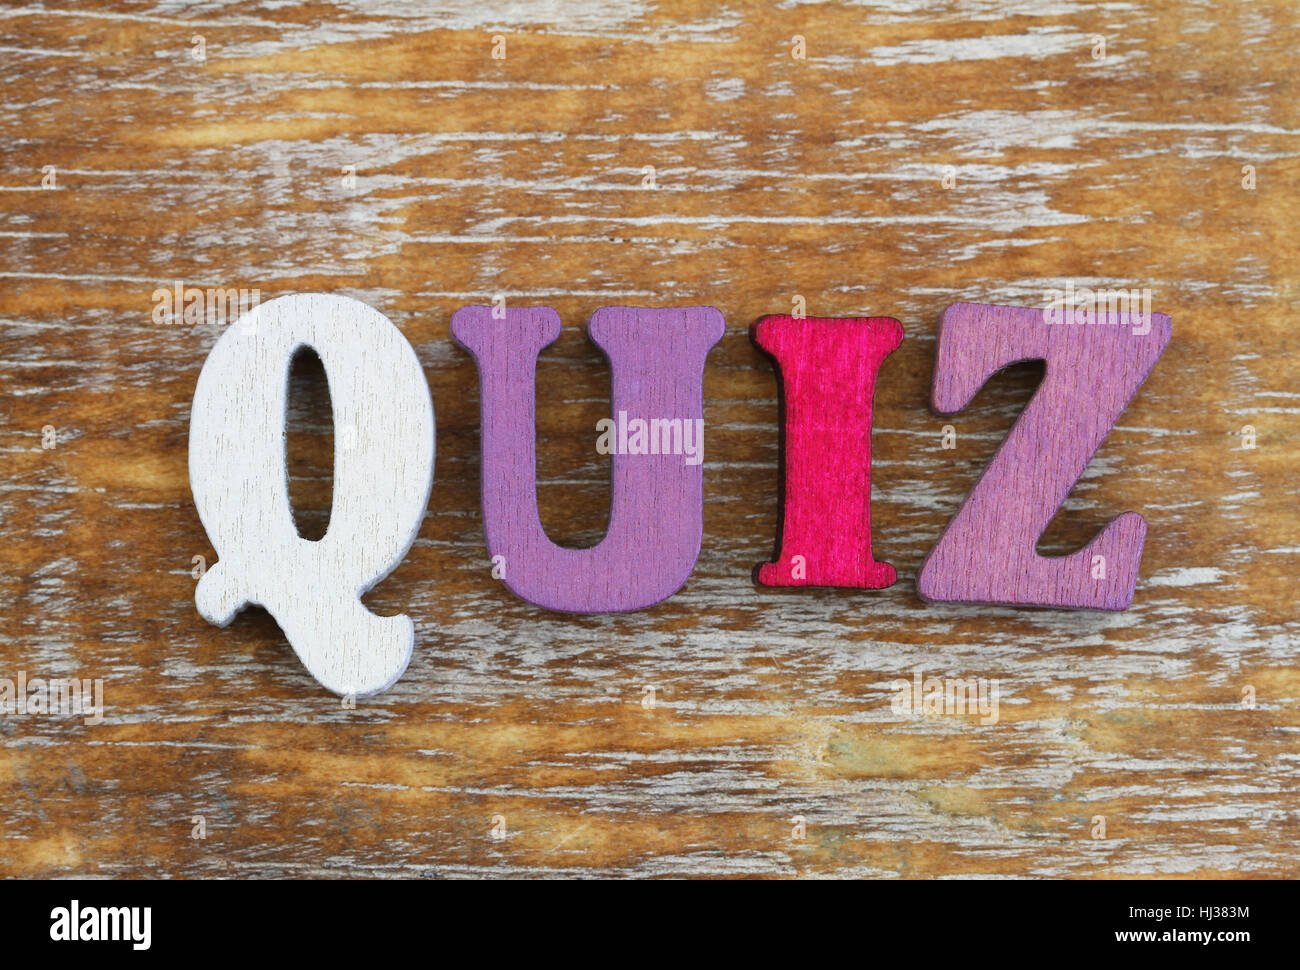 Word quiz written with colorful letters on rustic wooden surface Stock Photo